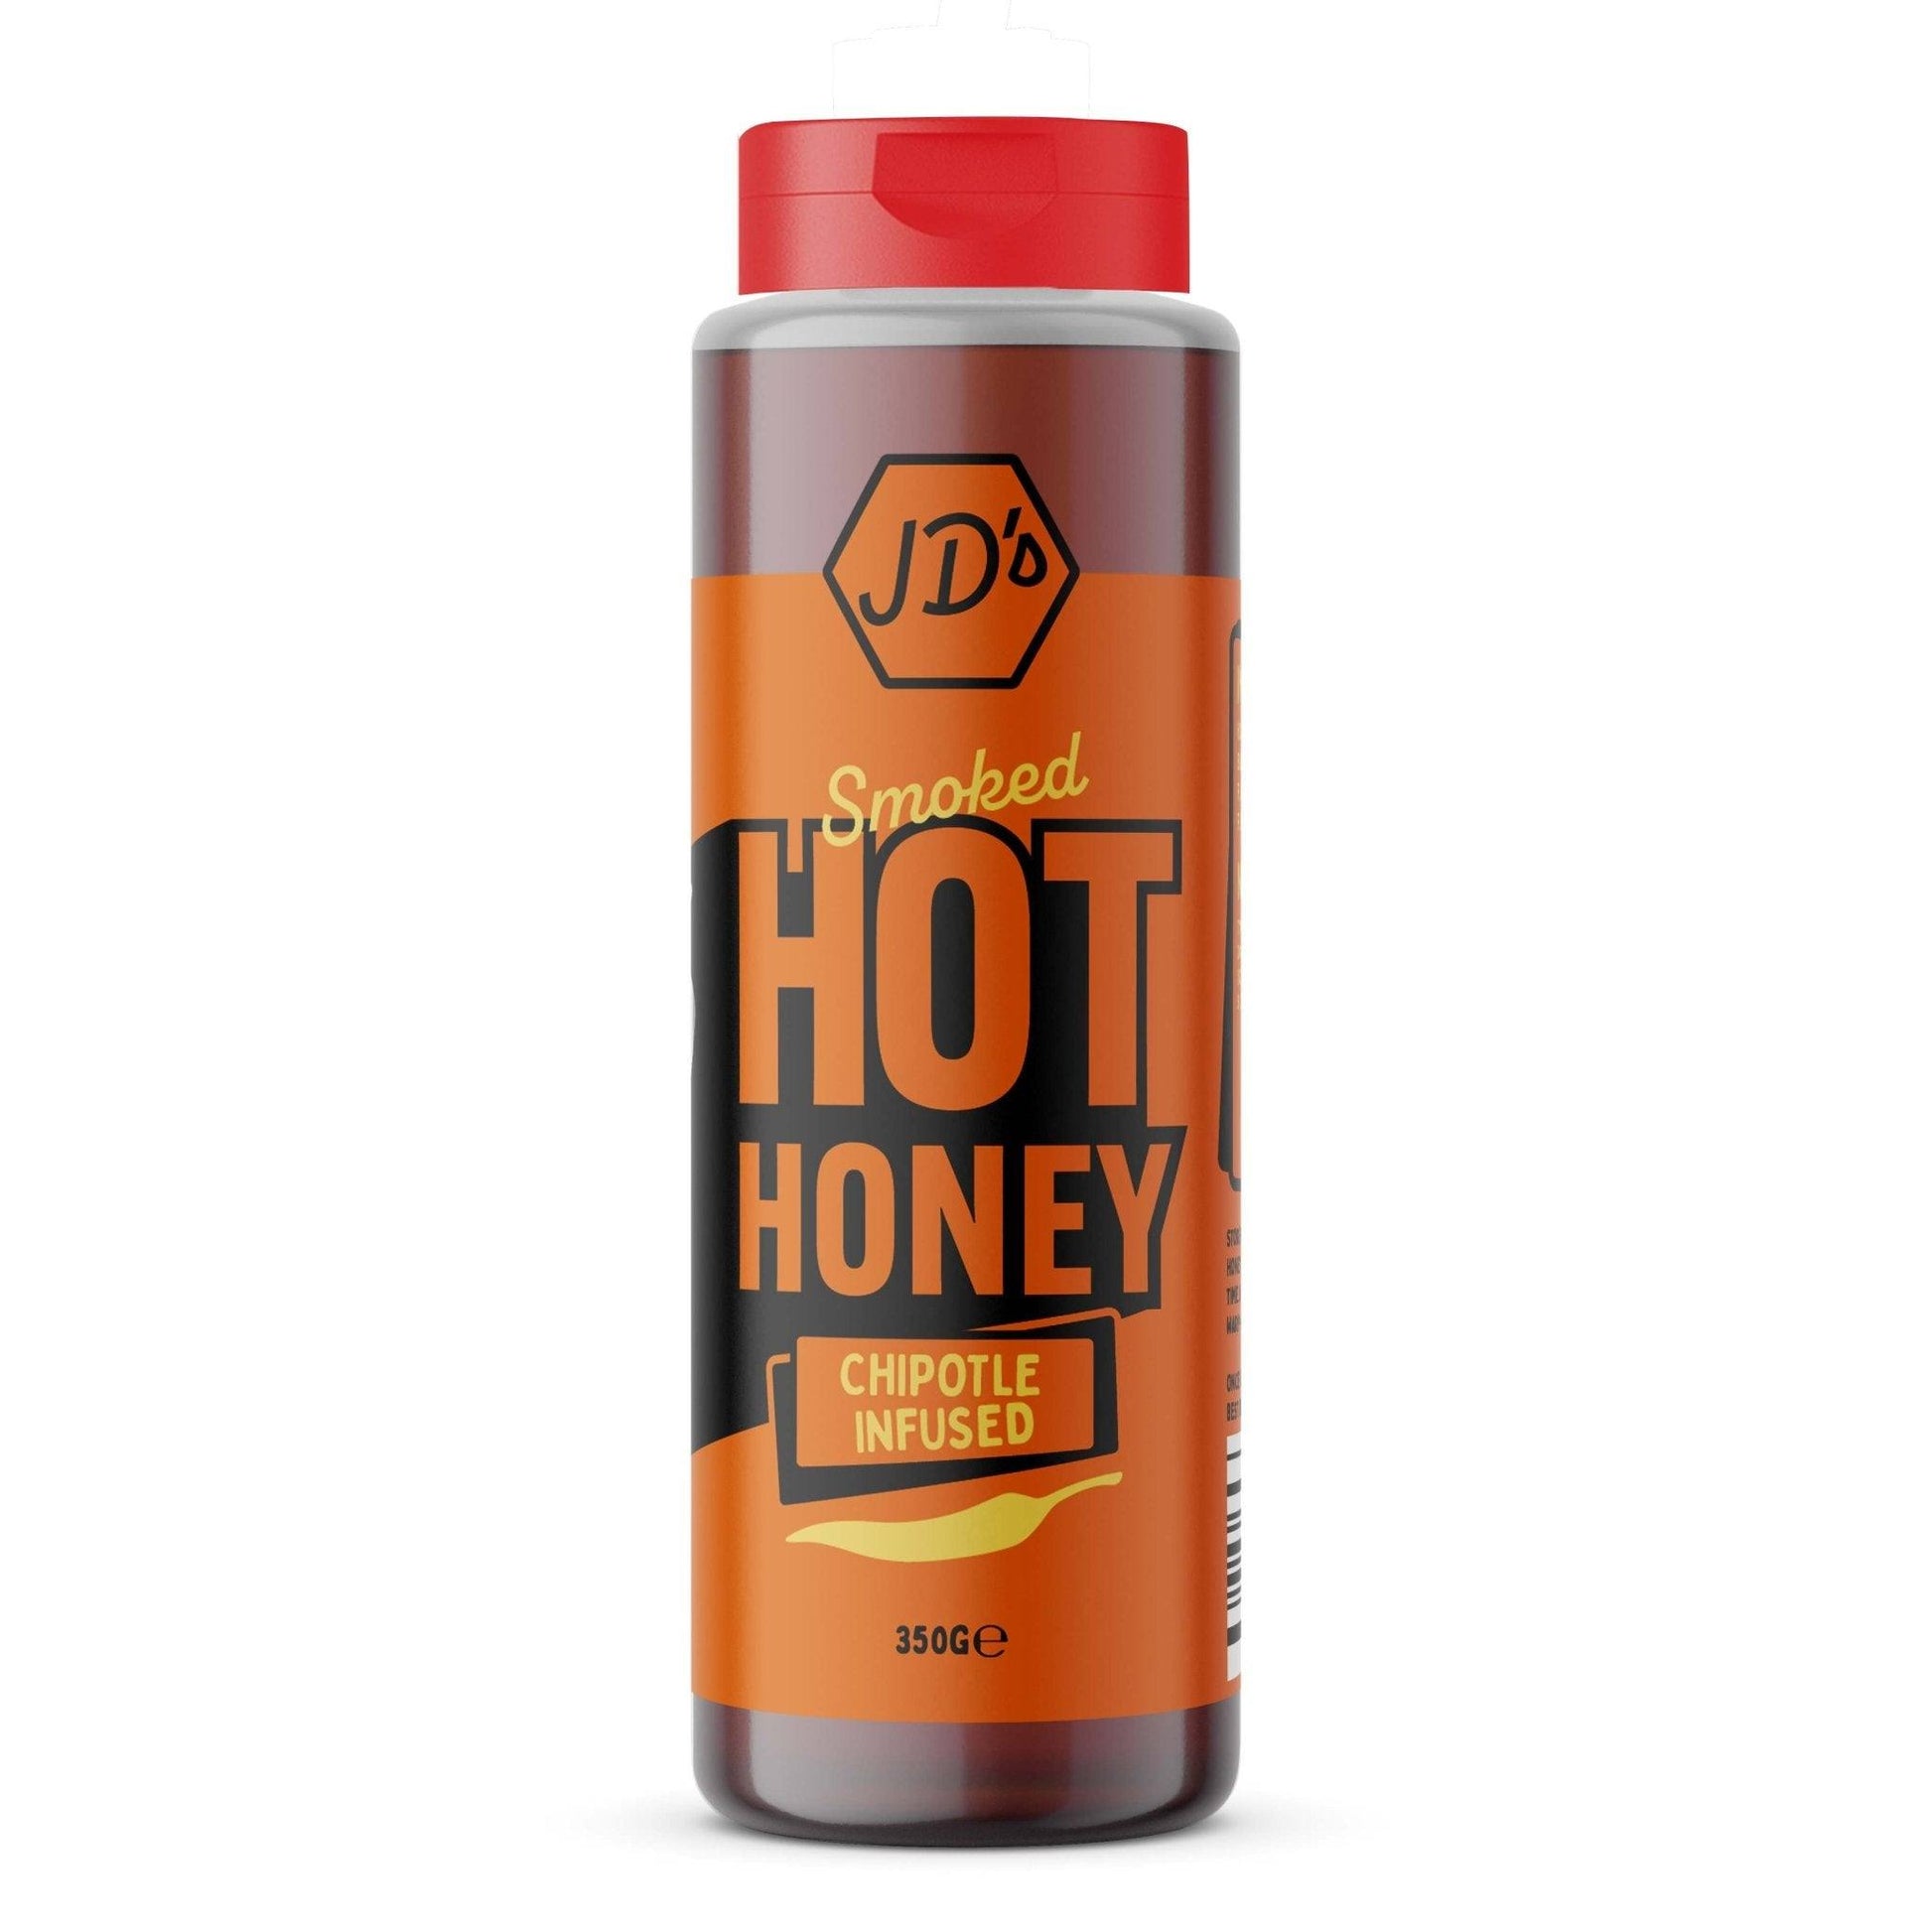 Smoked Hot Honey | 350G | JD's Hot Honey | Chipotle Infused - One Stop Chilli Shop